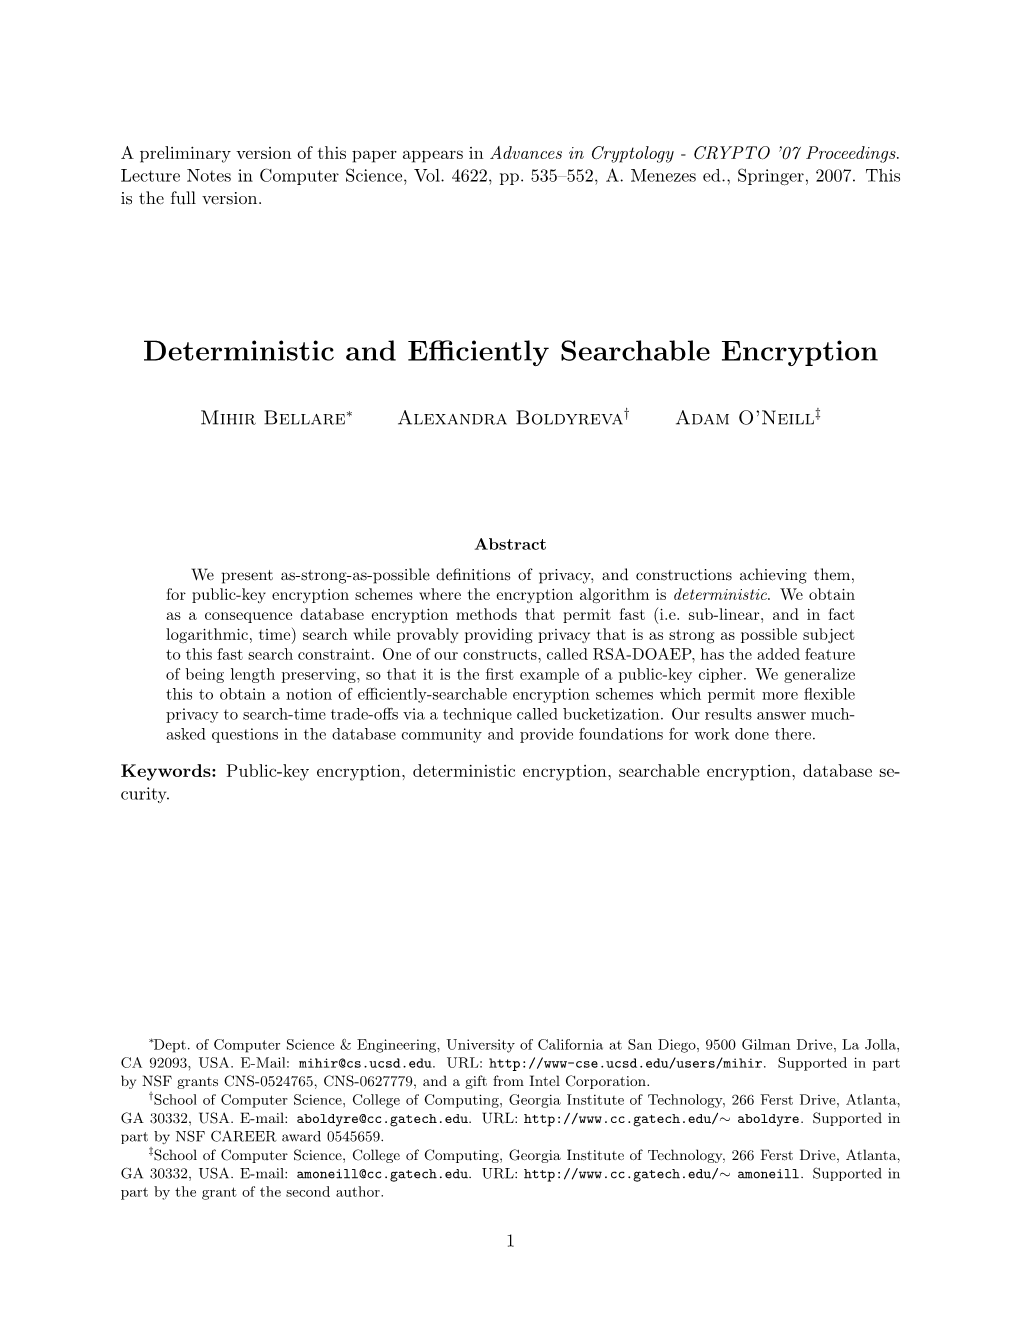 Deterministic and Efficiently Searchable Encryption